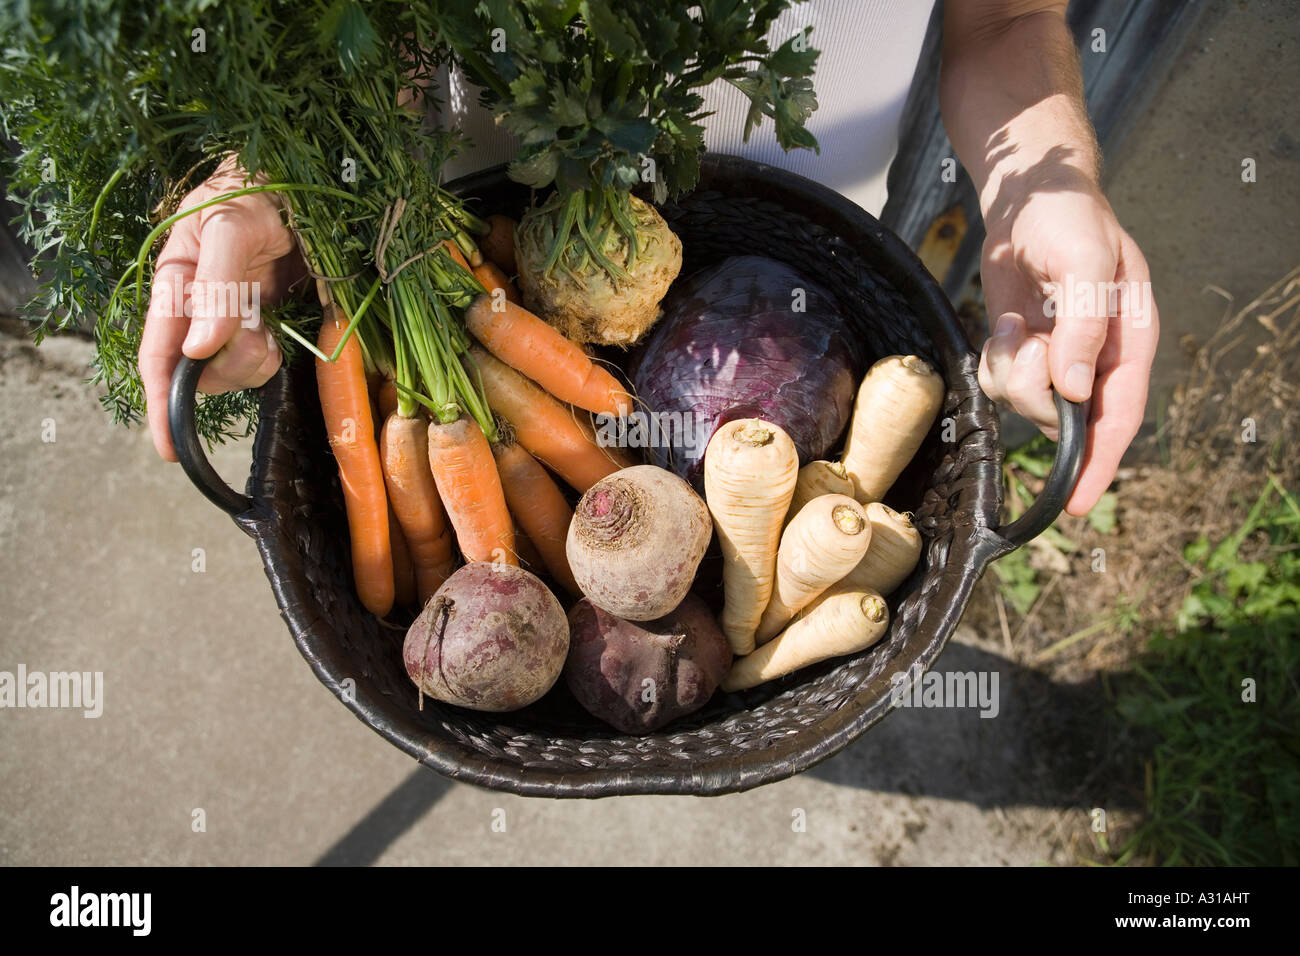 Freshly picked vegetables in a basket Stock Photo